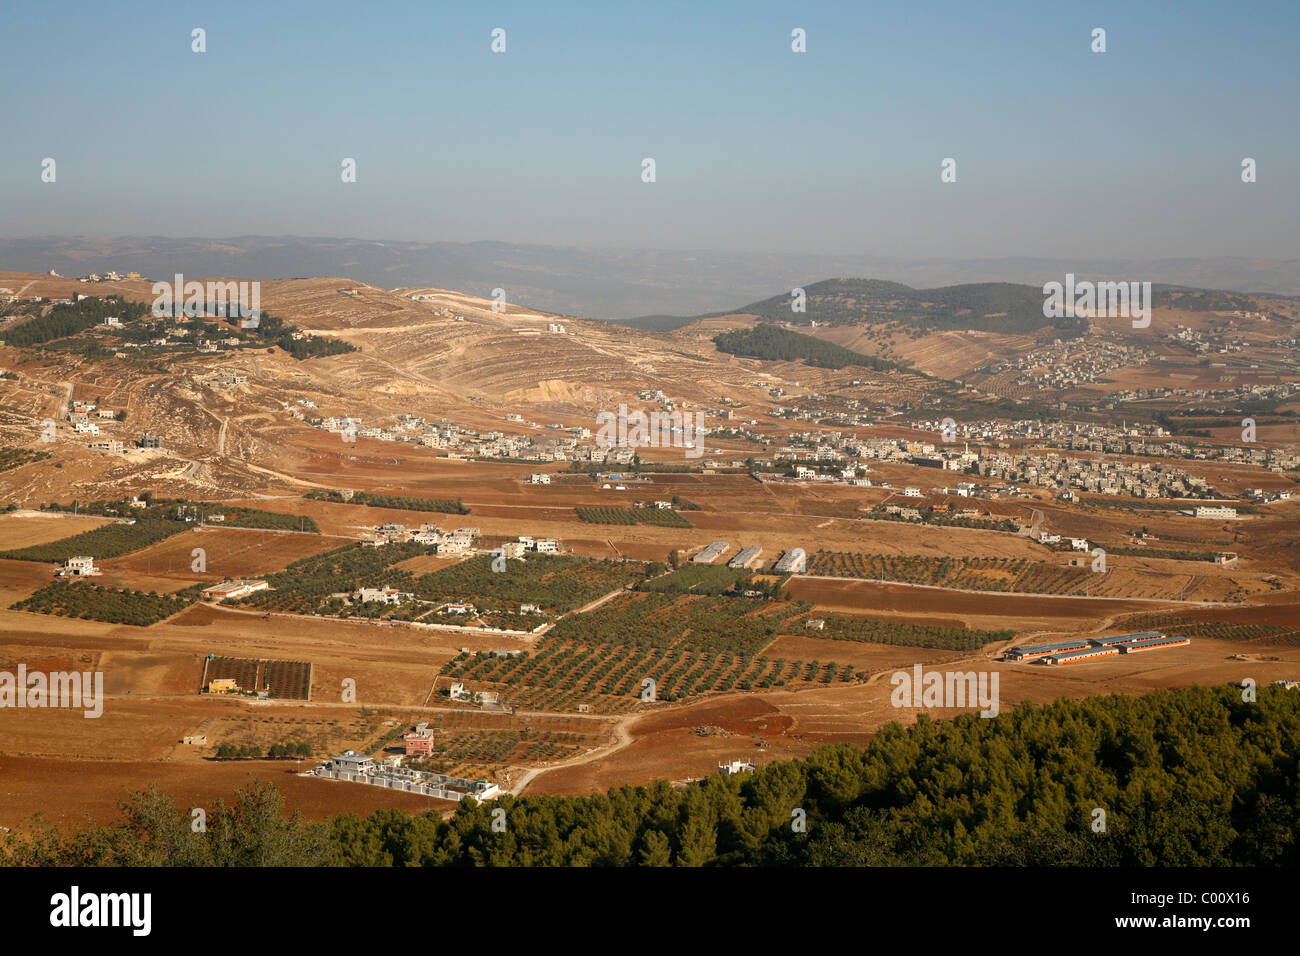 Typical landscape in the North of the country near Ajloun, Jordan. Stock Photo